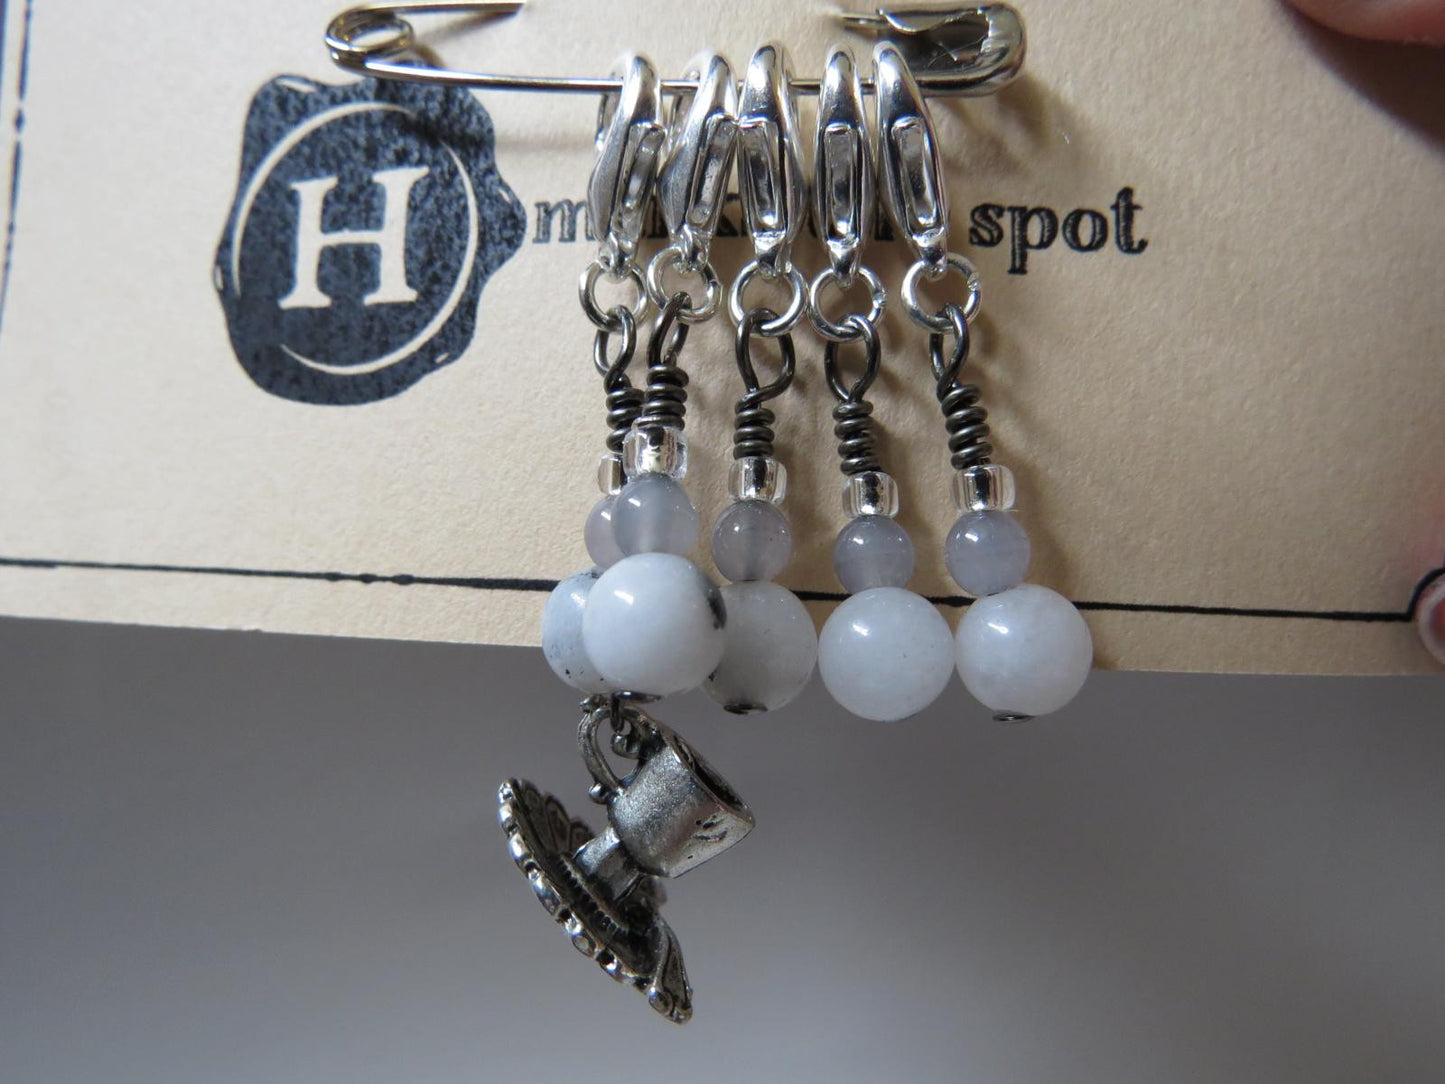 Teacup stitch marker set in gray